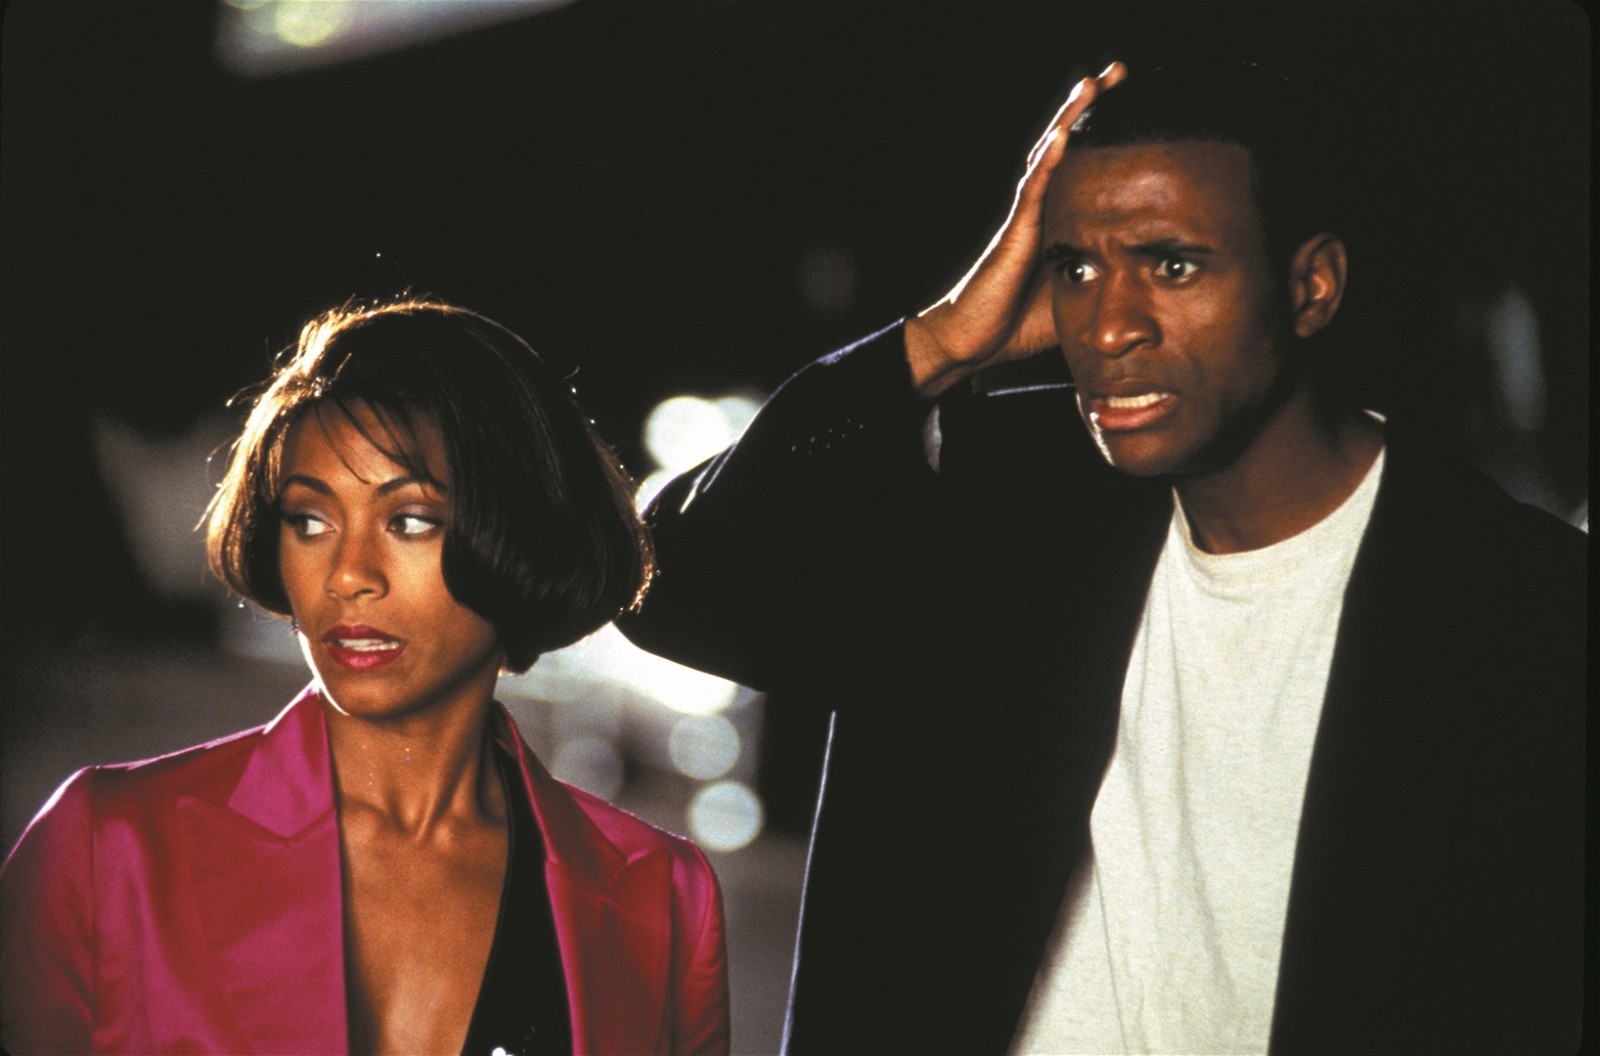 Jada Pinkett Smith and Tommy Davidson in a scene from Woo